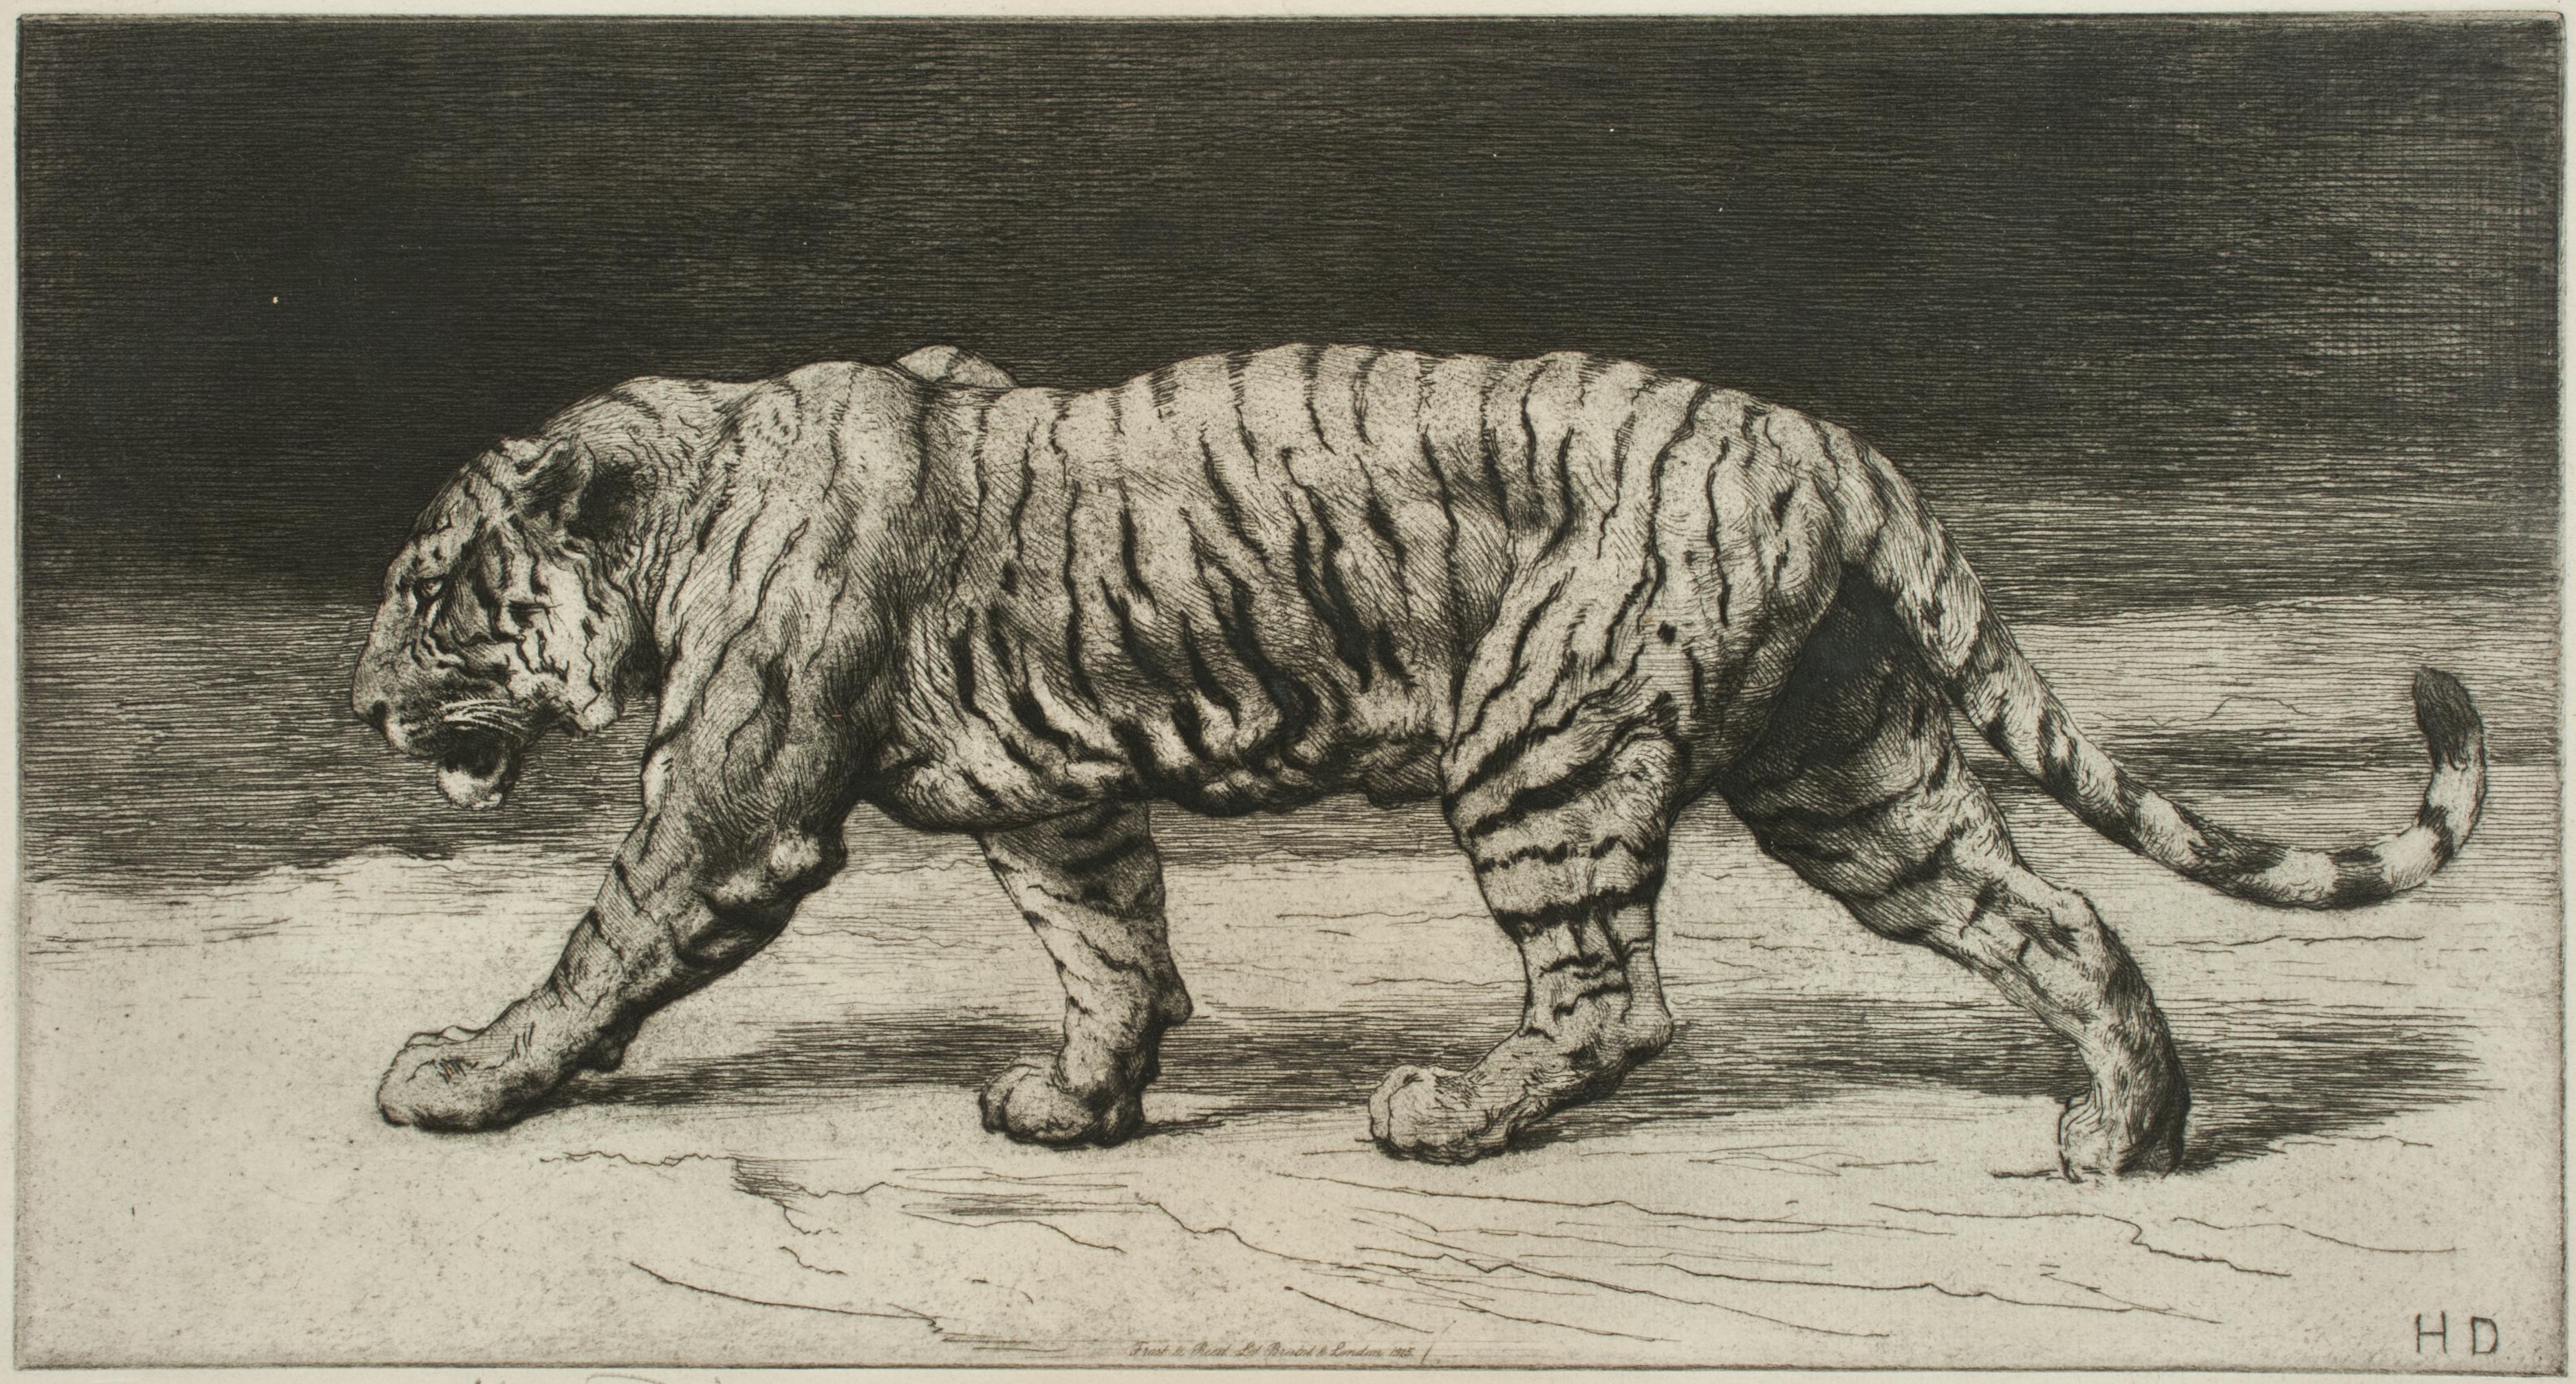 Sporting Art Prowling Tiger by Herbert Dicksee 1915, Etching, Signed in Pencil